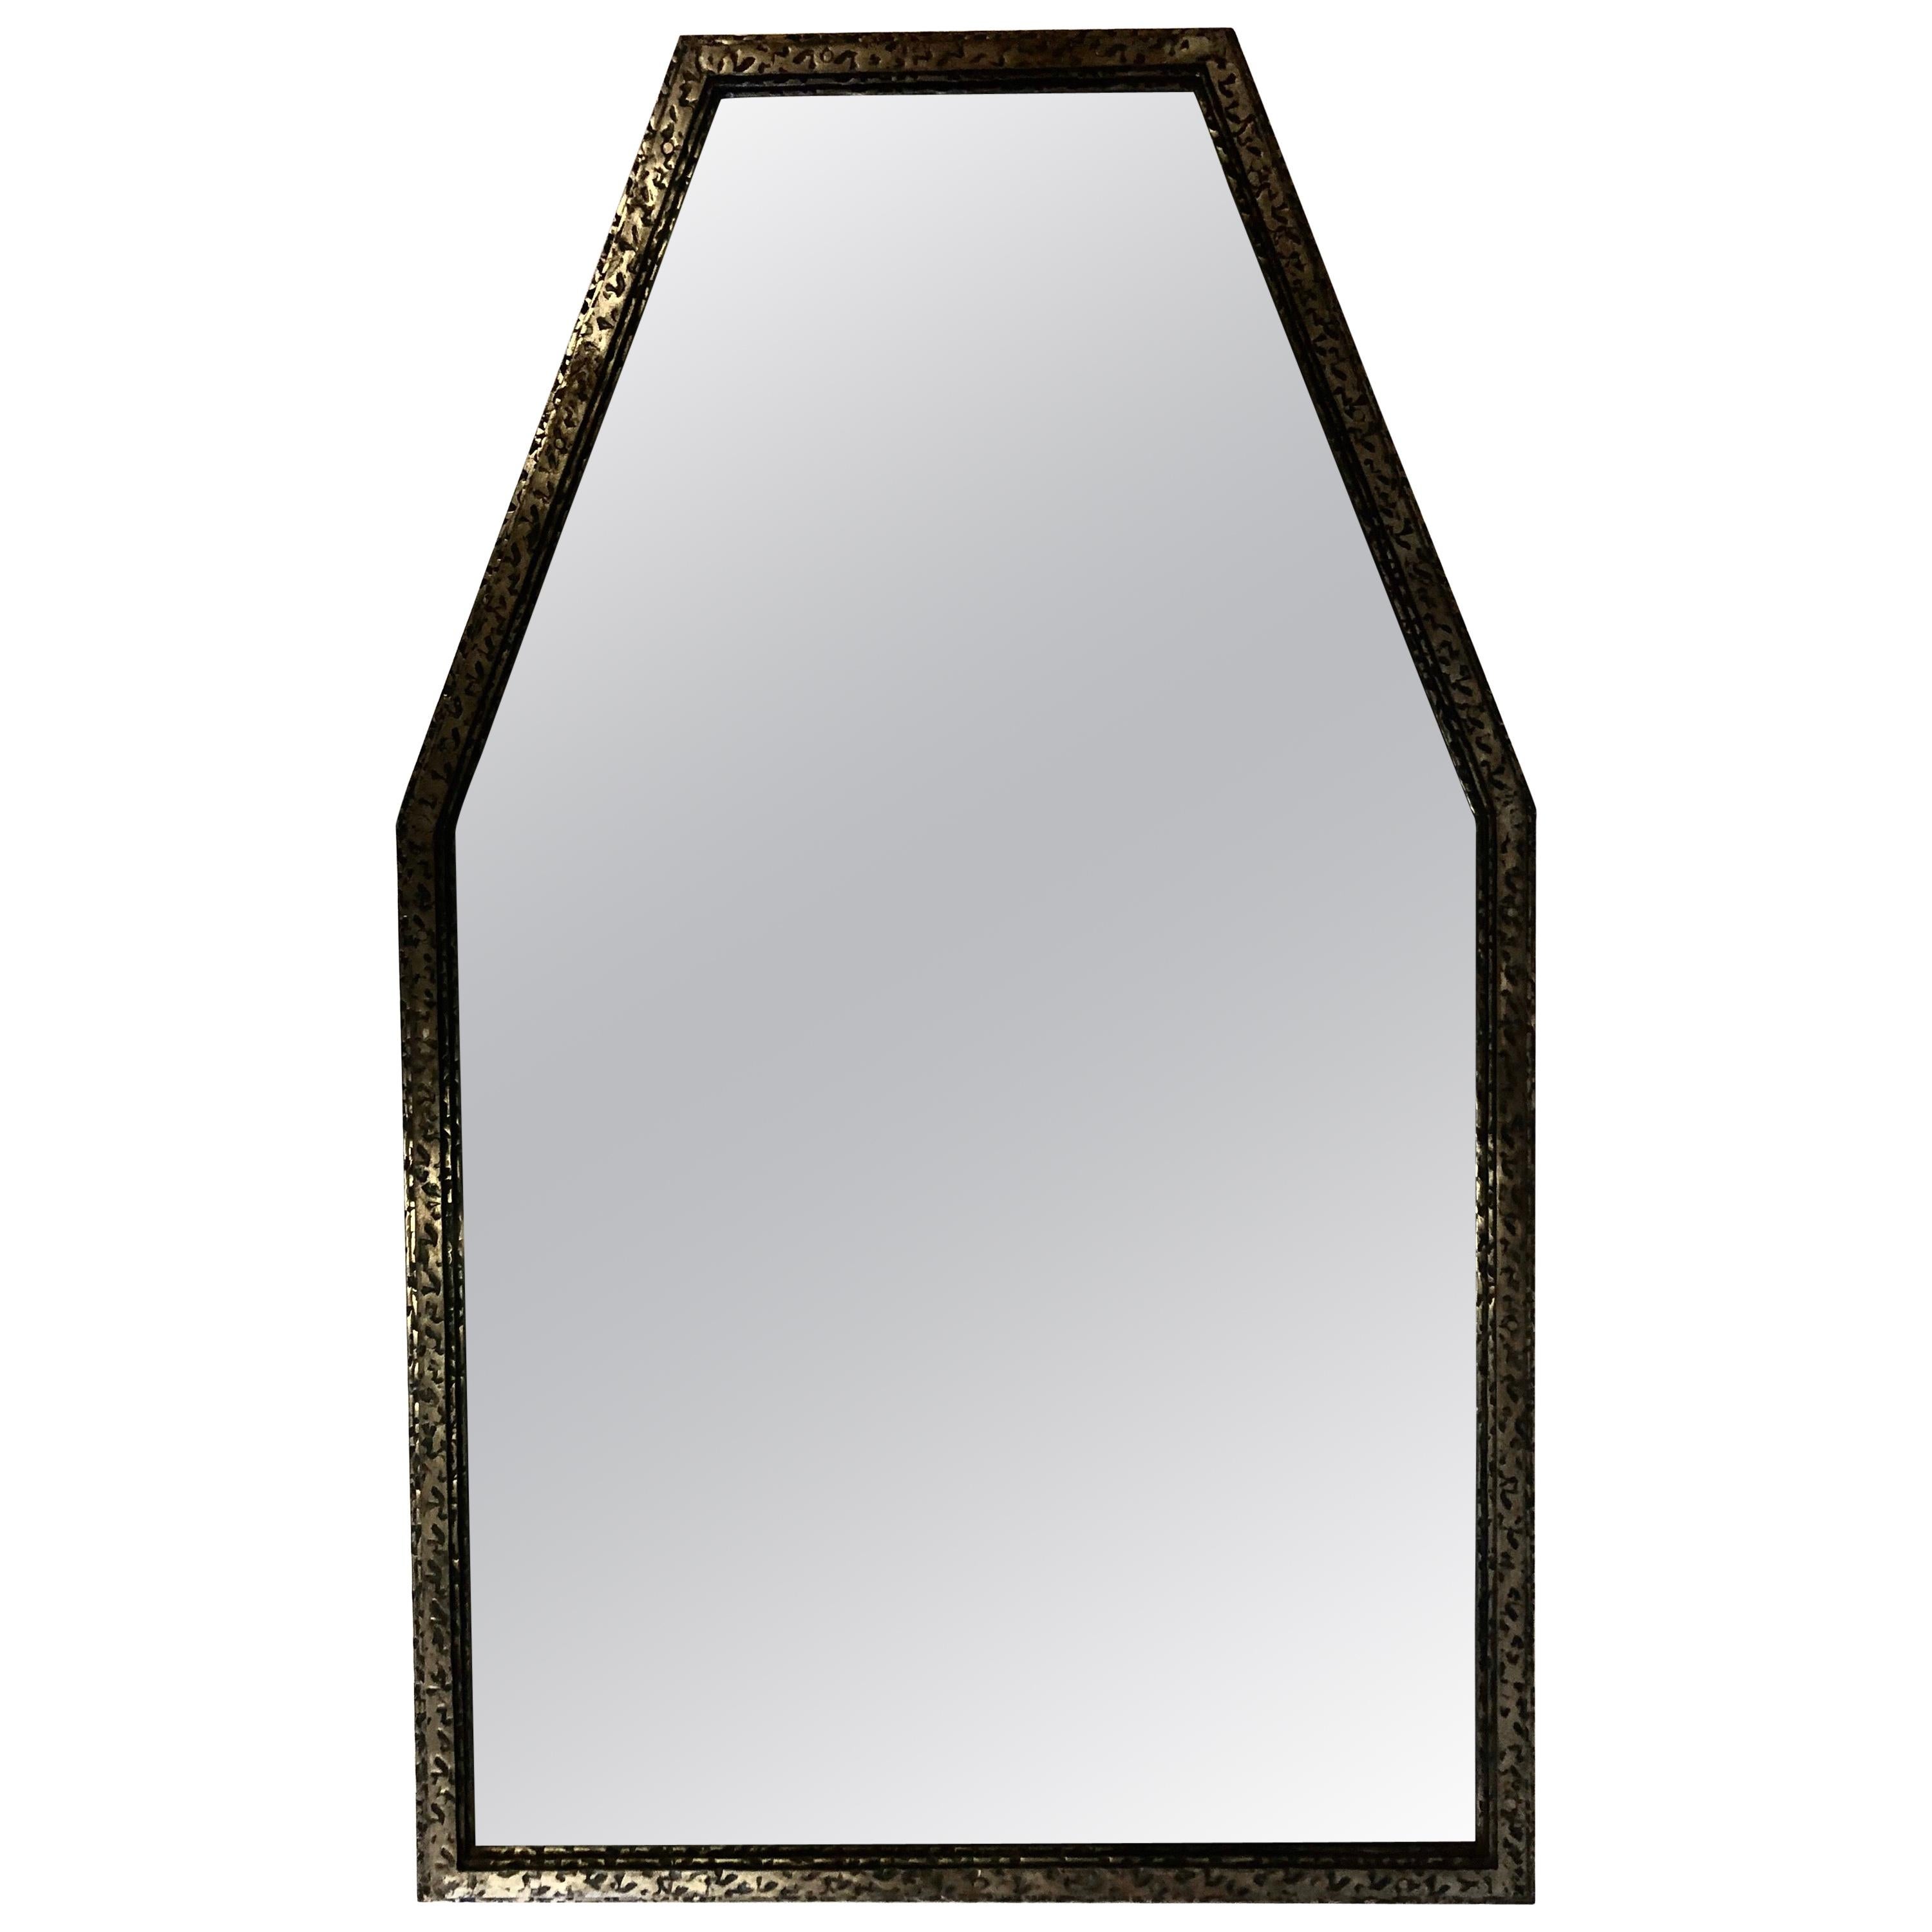 Early Modern / Cubist Hammered Wrought Iron Mirror Attributed to Edgar Brandt